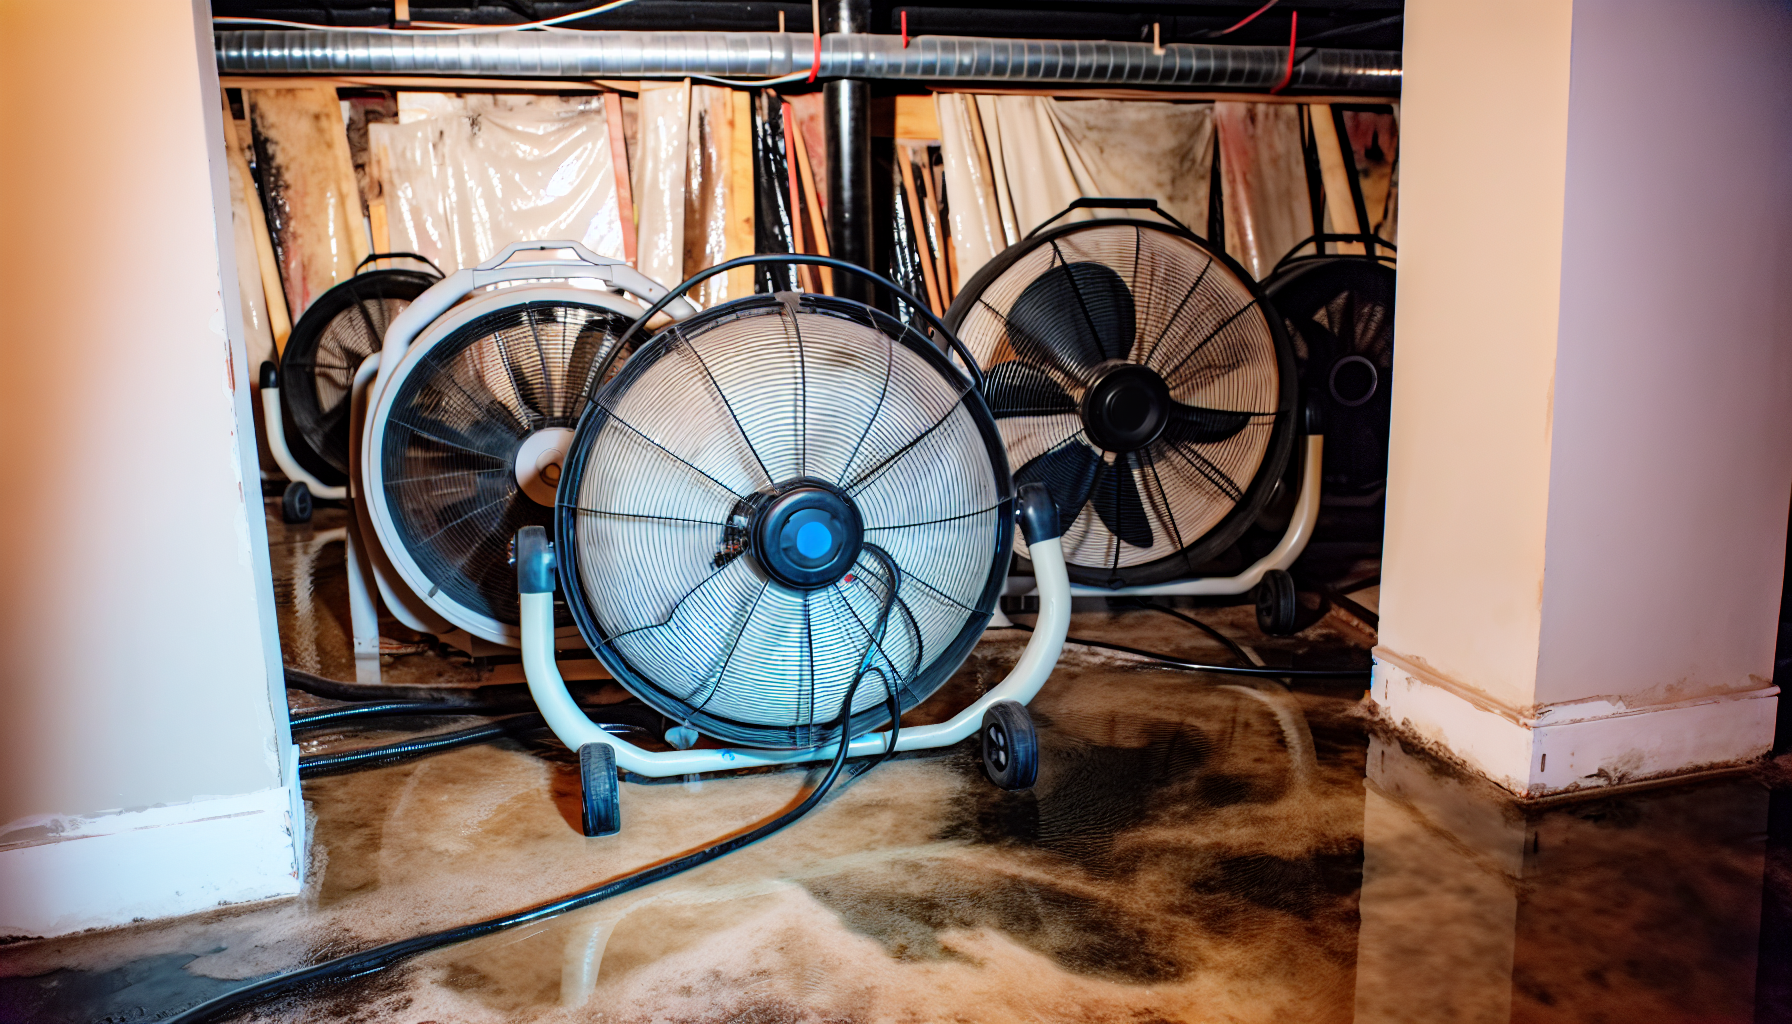 Industrial fans running in a water-damaged area